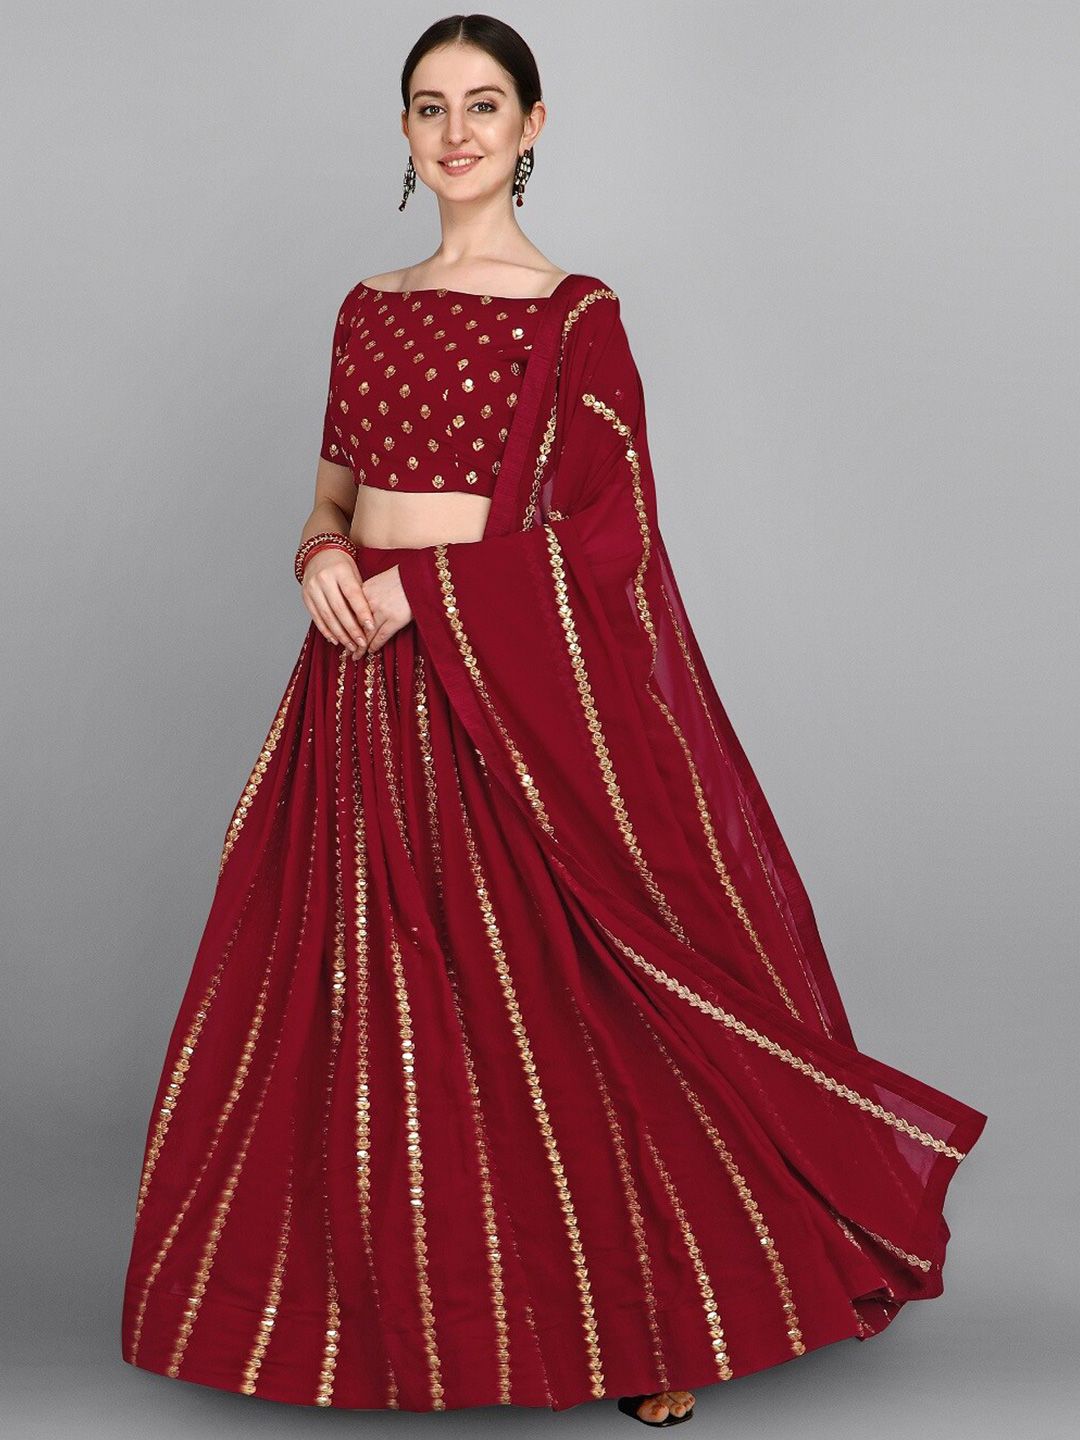 YOYO Fashion Maroon & Gold-Toned Embroidered Semi-Stitched Lehenga & Unstitched Blouse With Dupatta Price in India